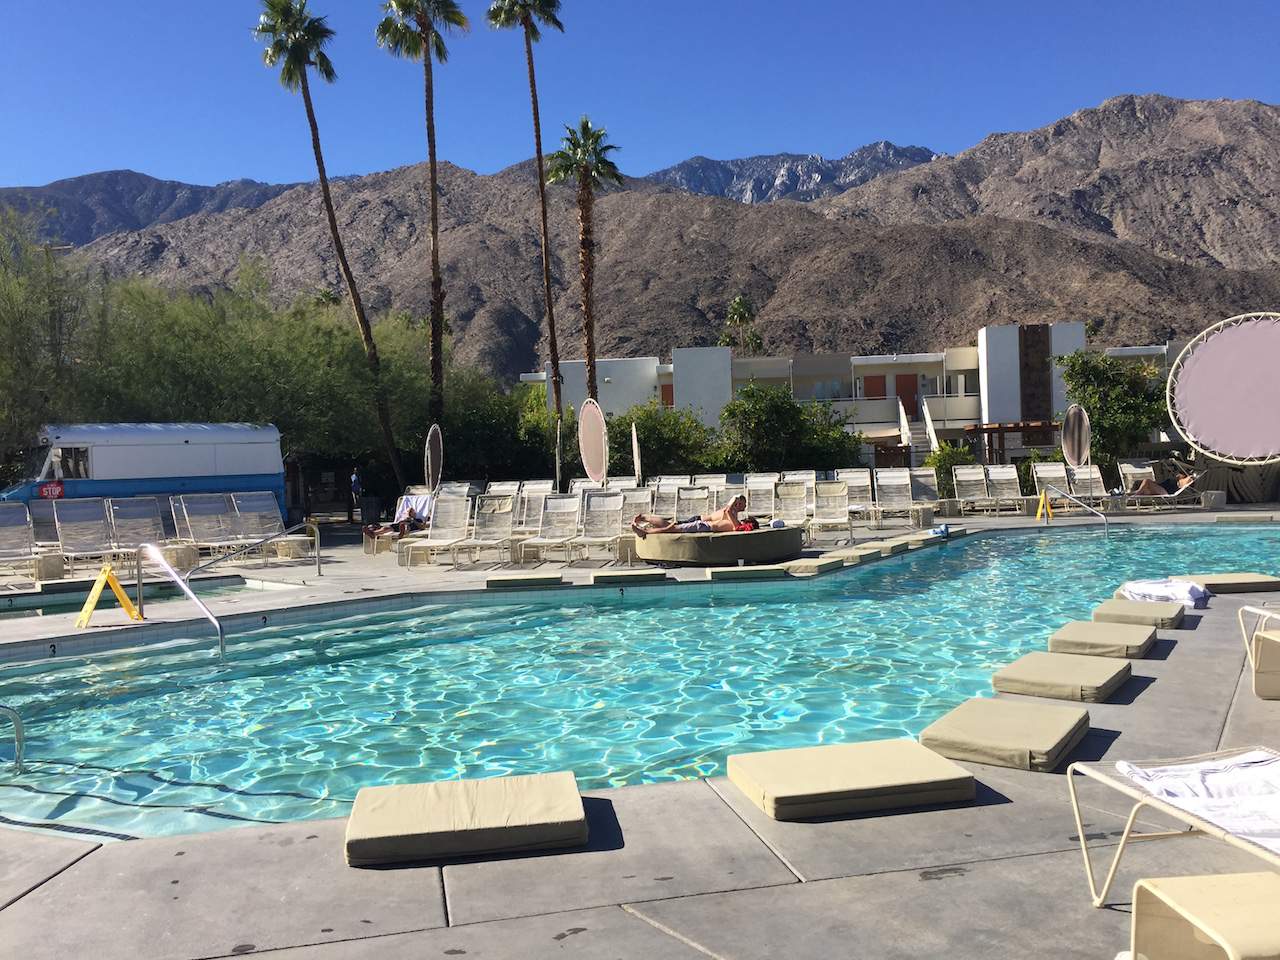 Hotel Review: Ace Hotel, Palm Springs, California